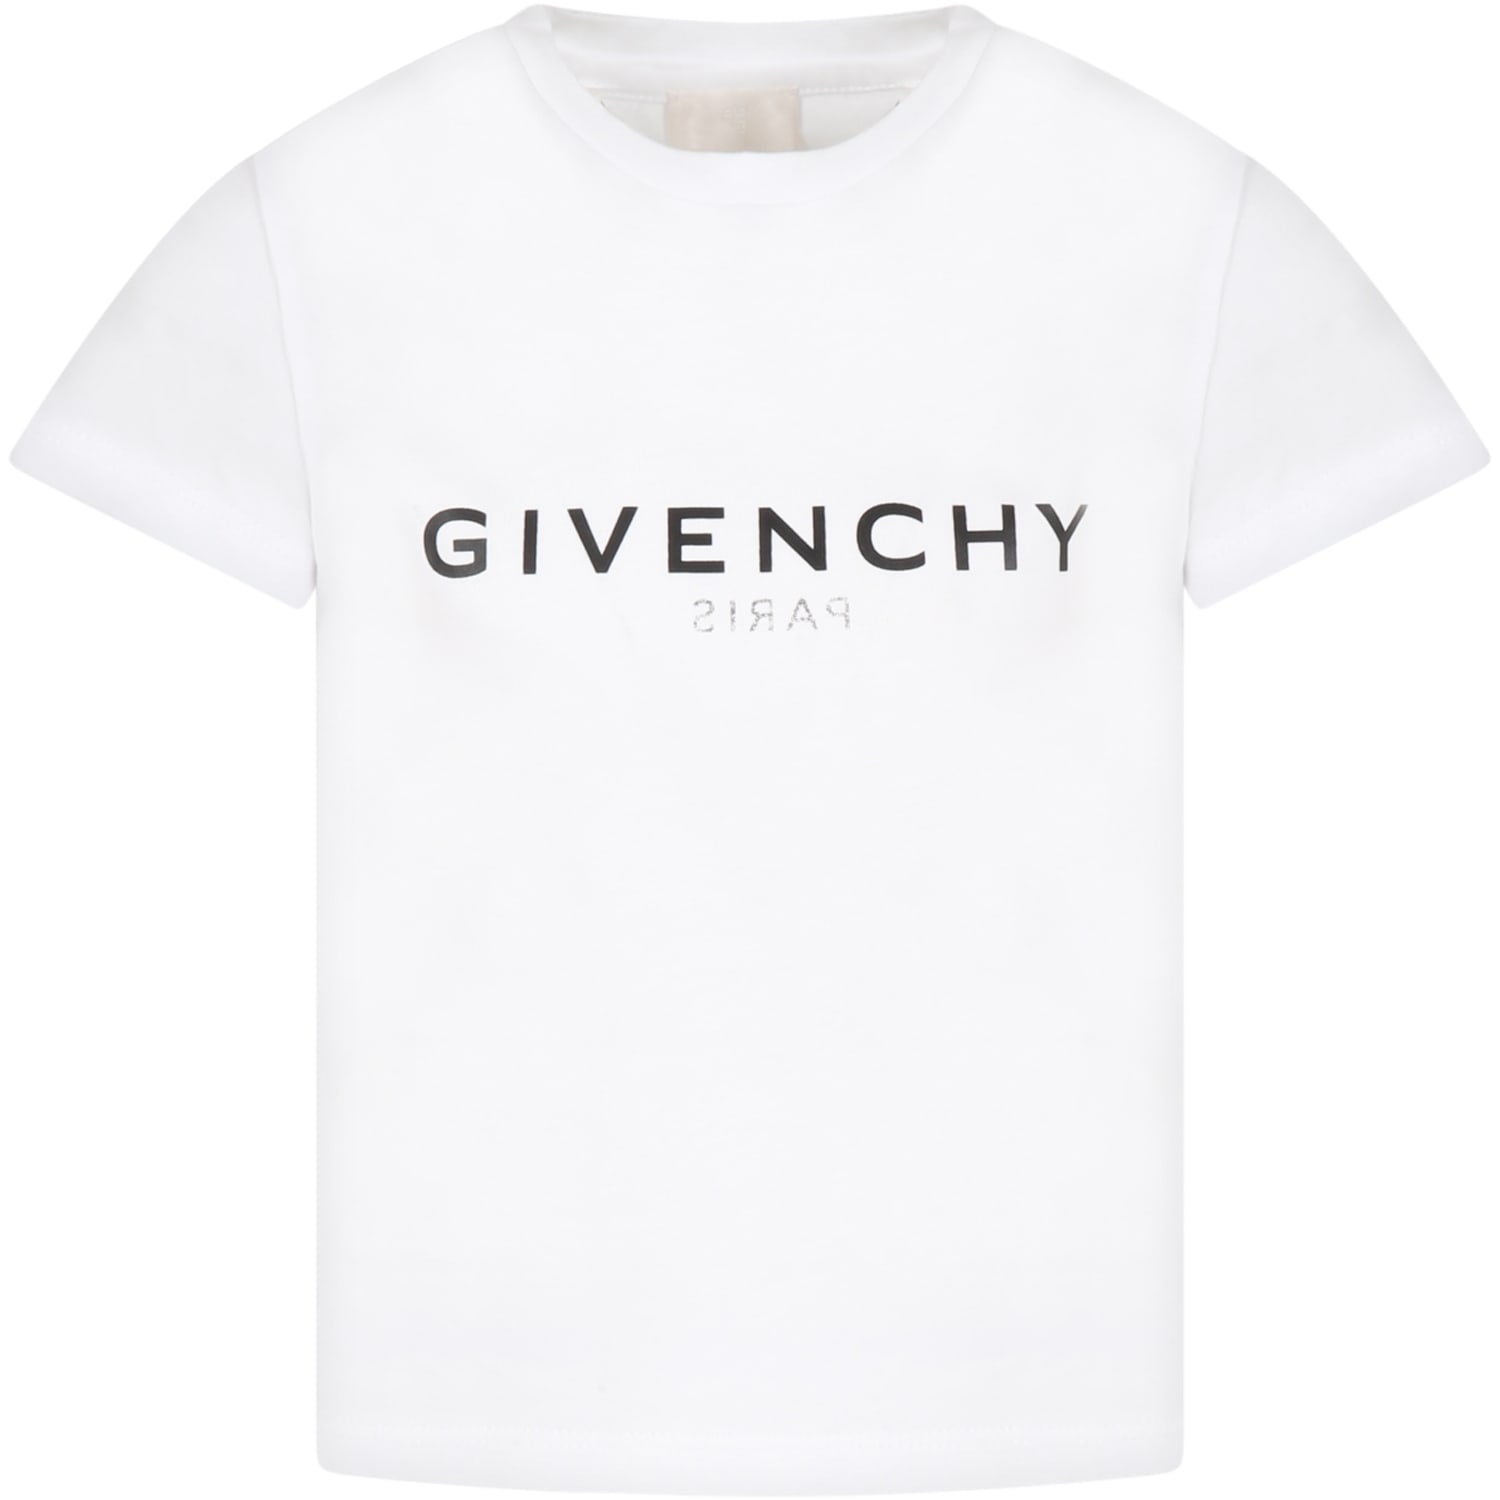 Givenchy White T-shirt For Kids With Black Logo